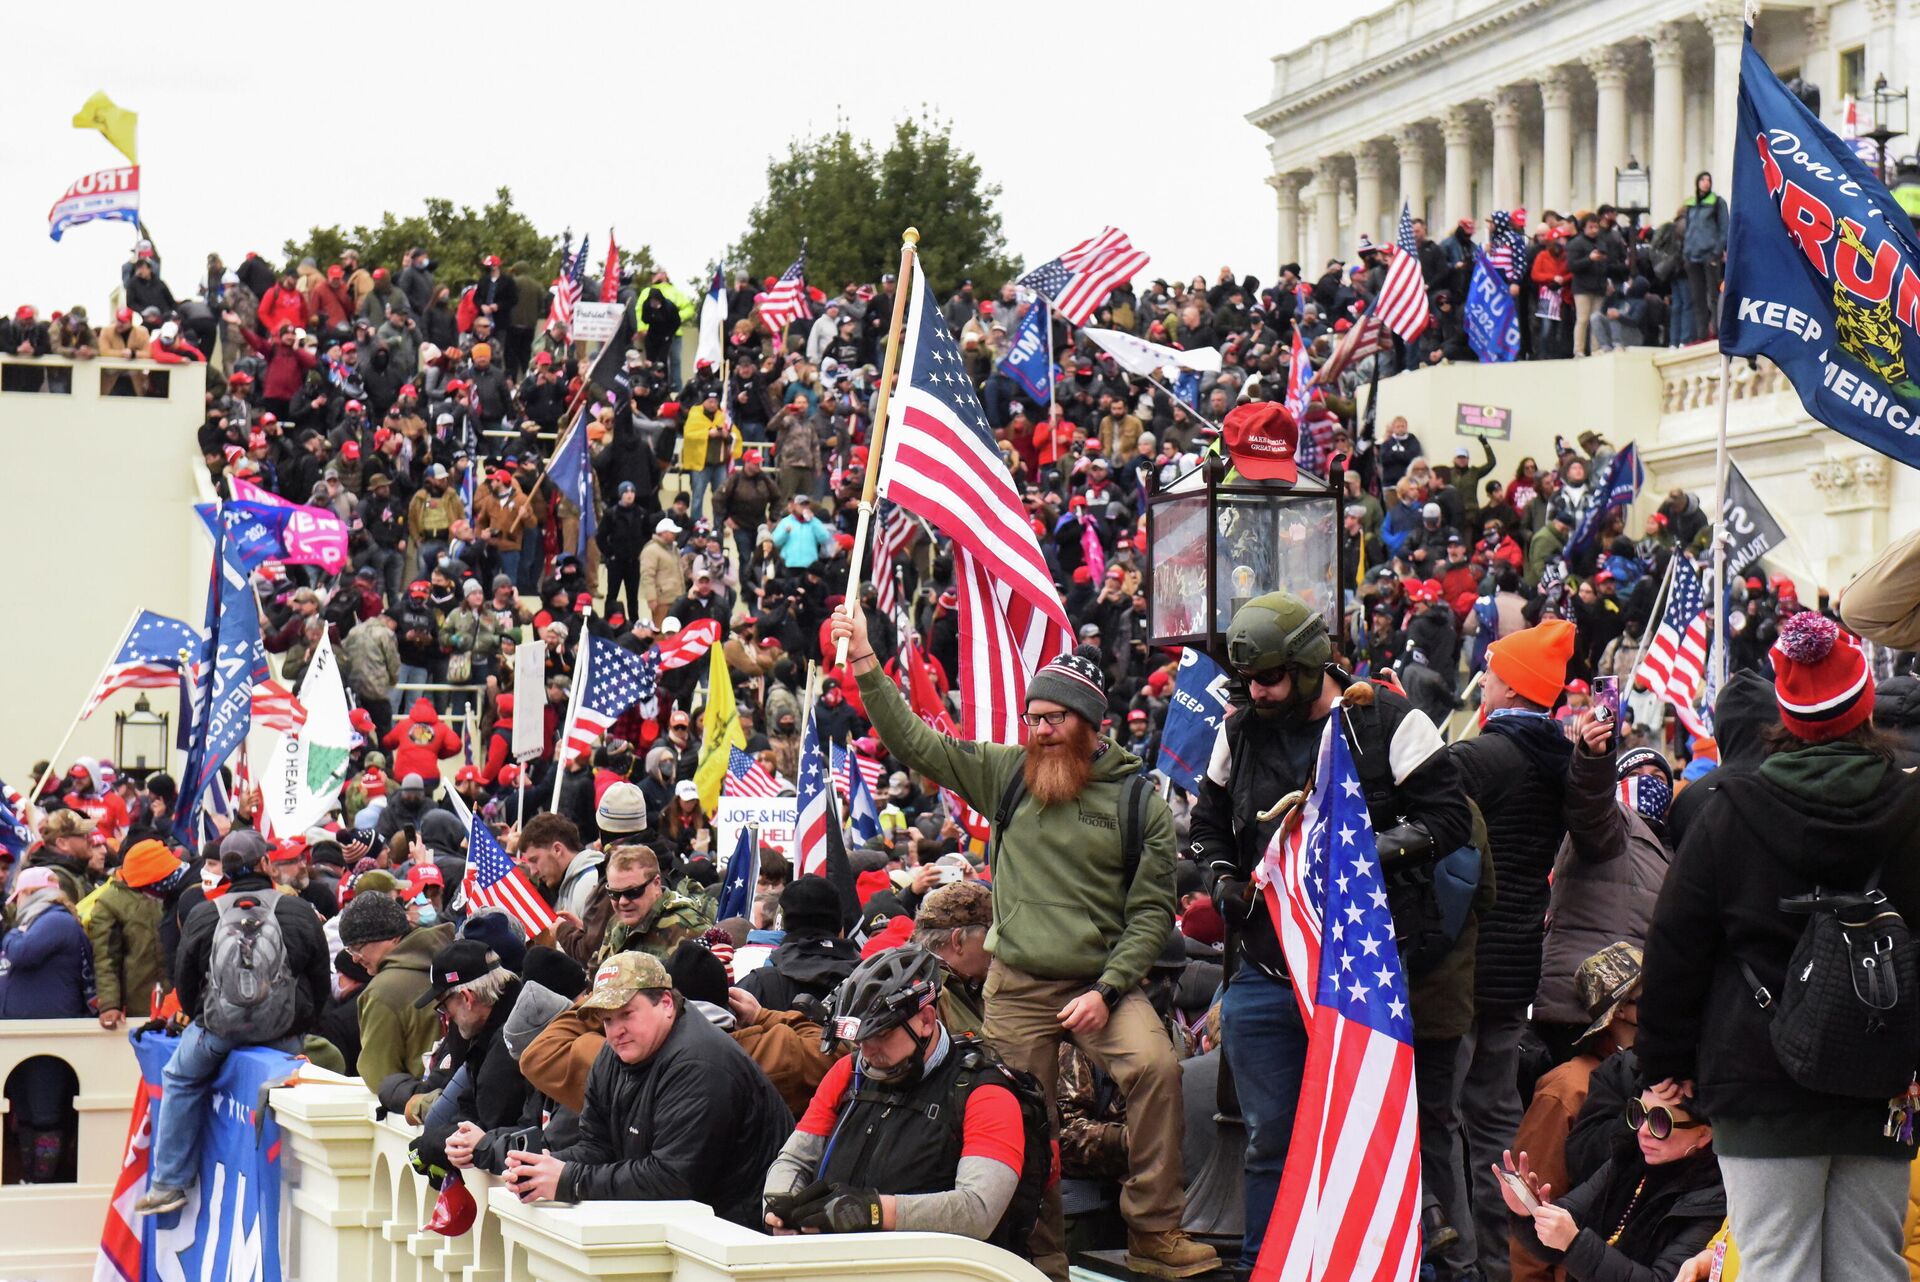 Supporters of U.S. President Donald Trump gather in front of the U.S. Capitol Building in Washington, U.S. January 6, 2021 - Sputnik International, 1920, 28.09.2021